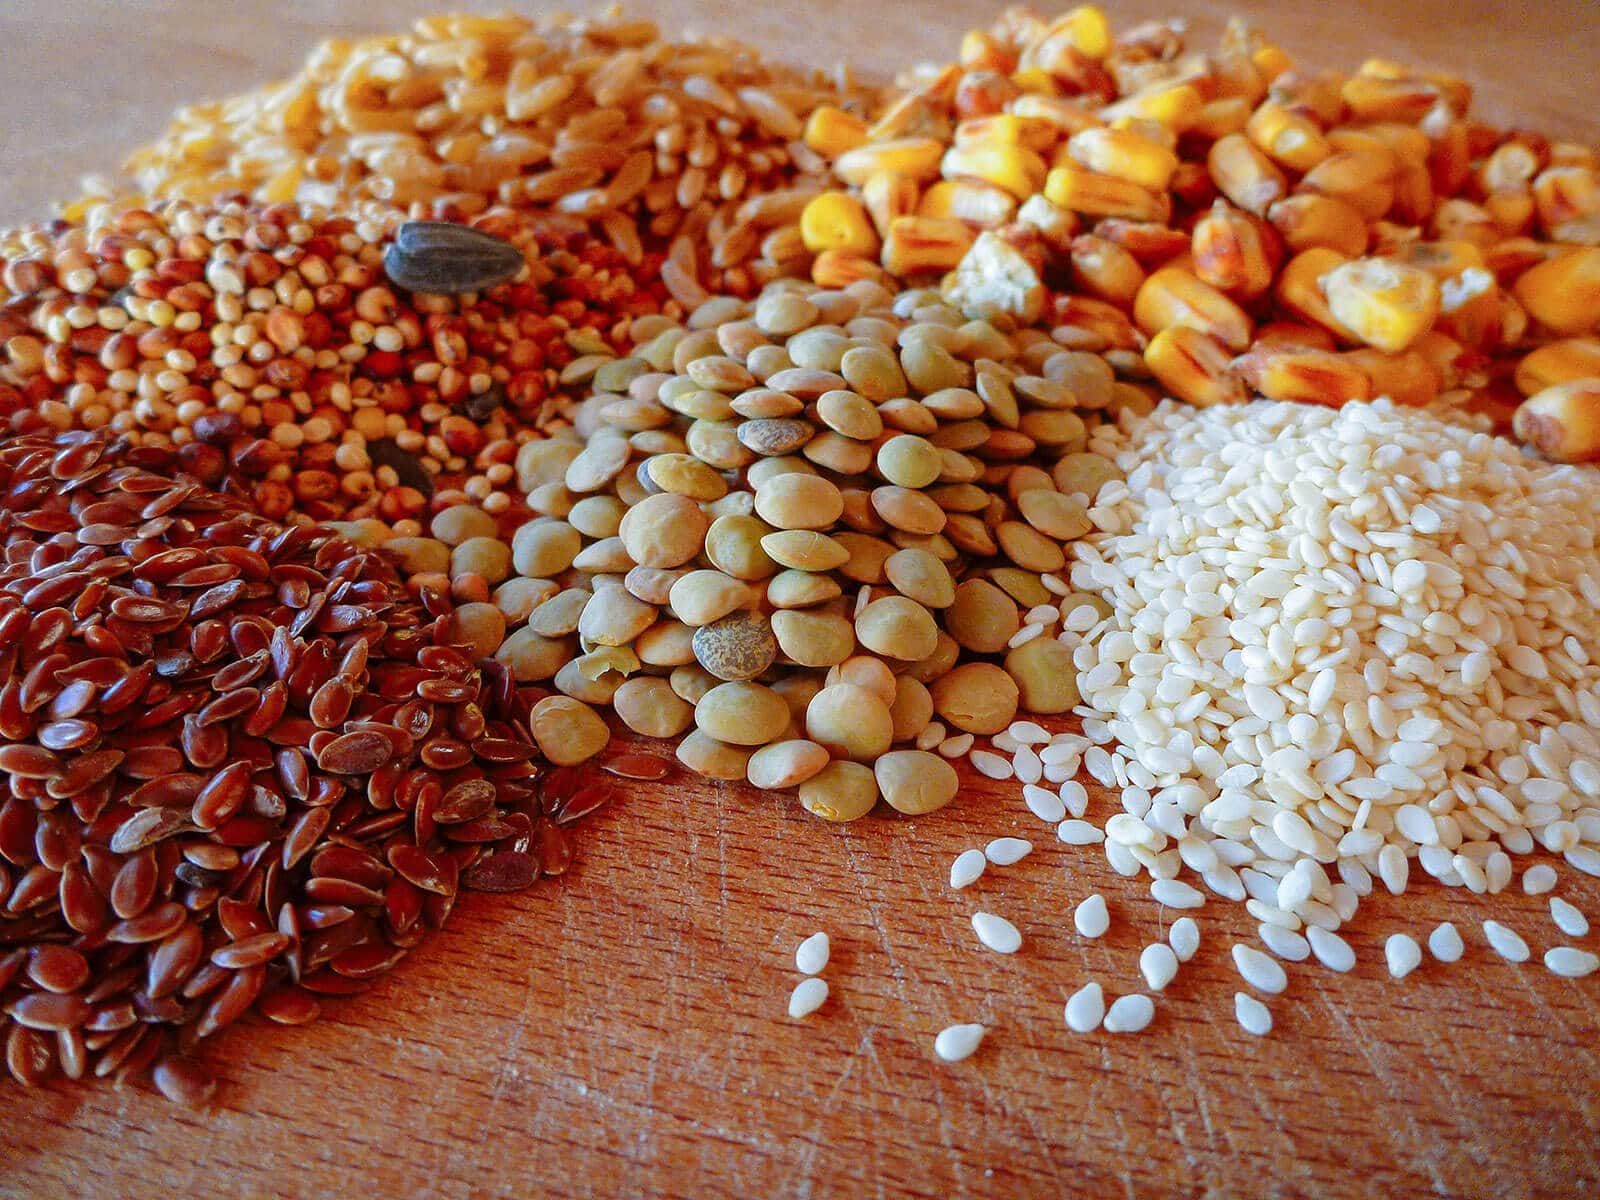 Handfuls of flax seeds, wheat berries, millet, lentils, corn, and sesame seeds piled on a butcher block surface